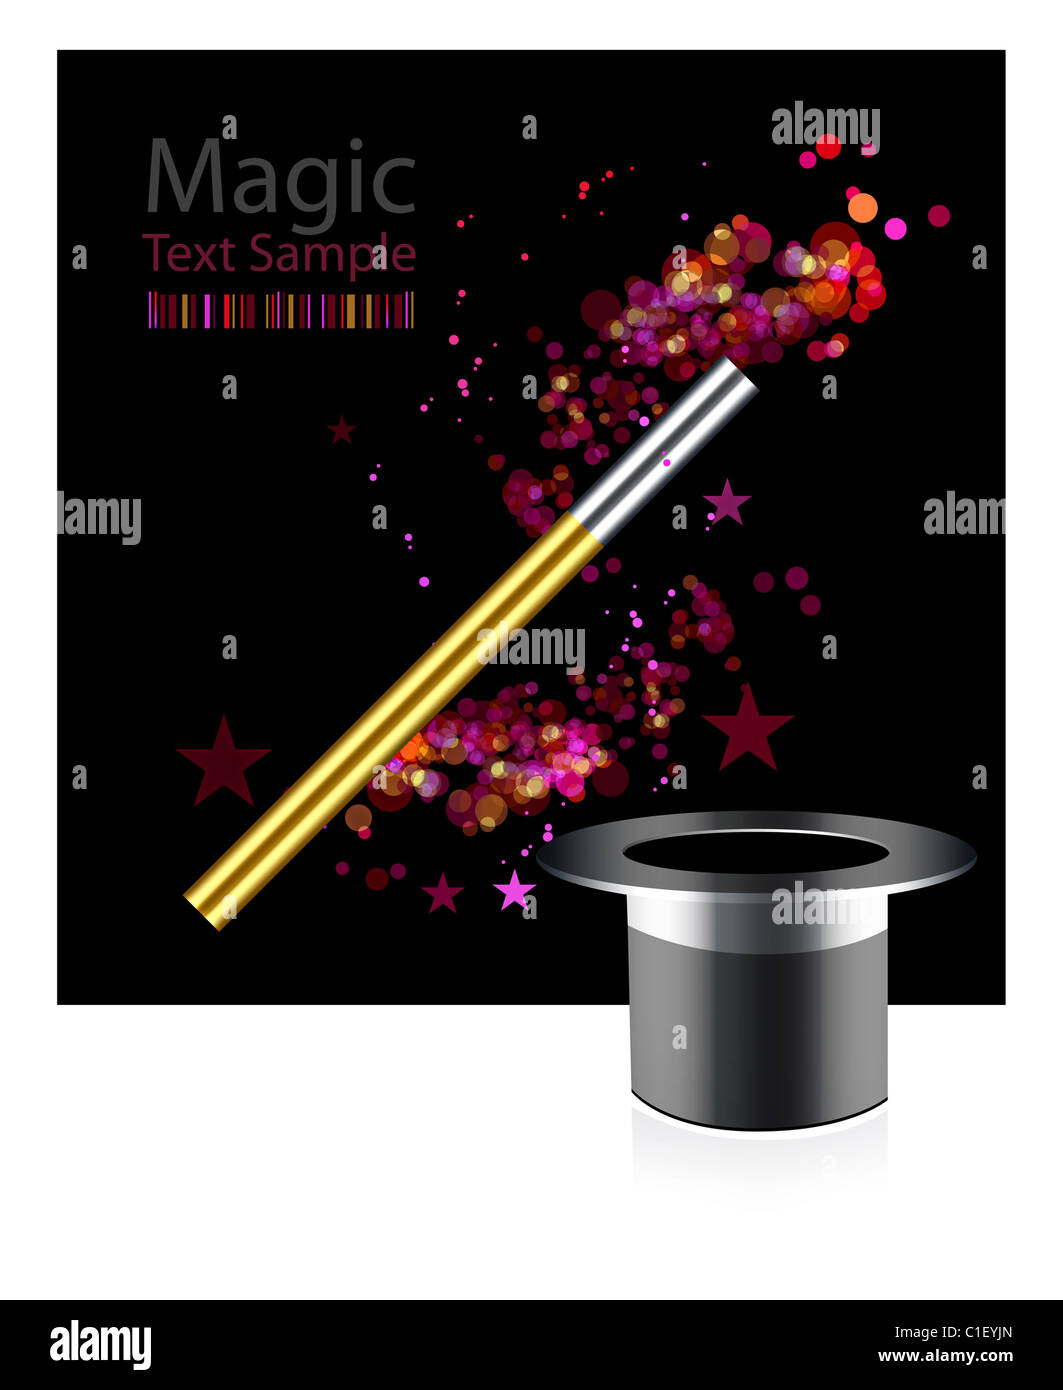 Beautiful vector magic background with wand and hat Stock Photo